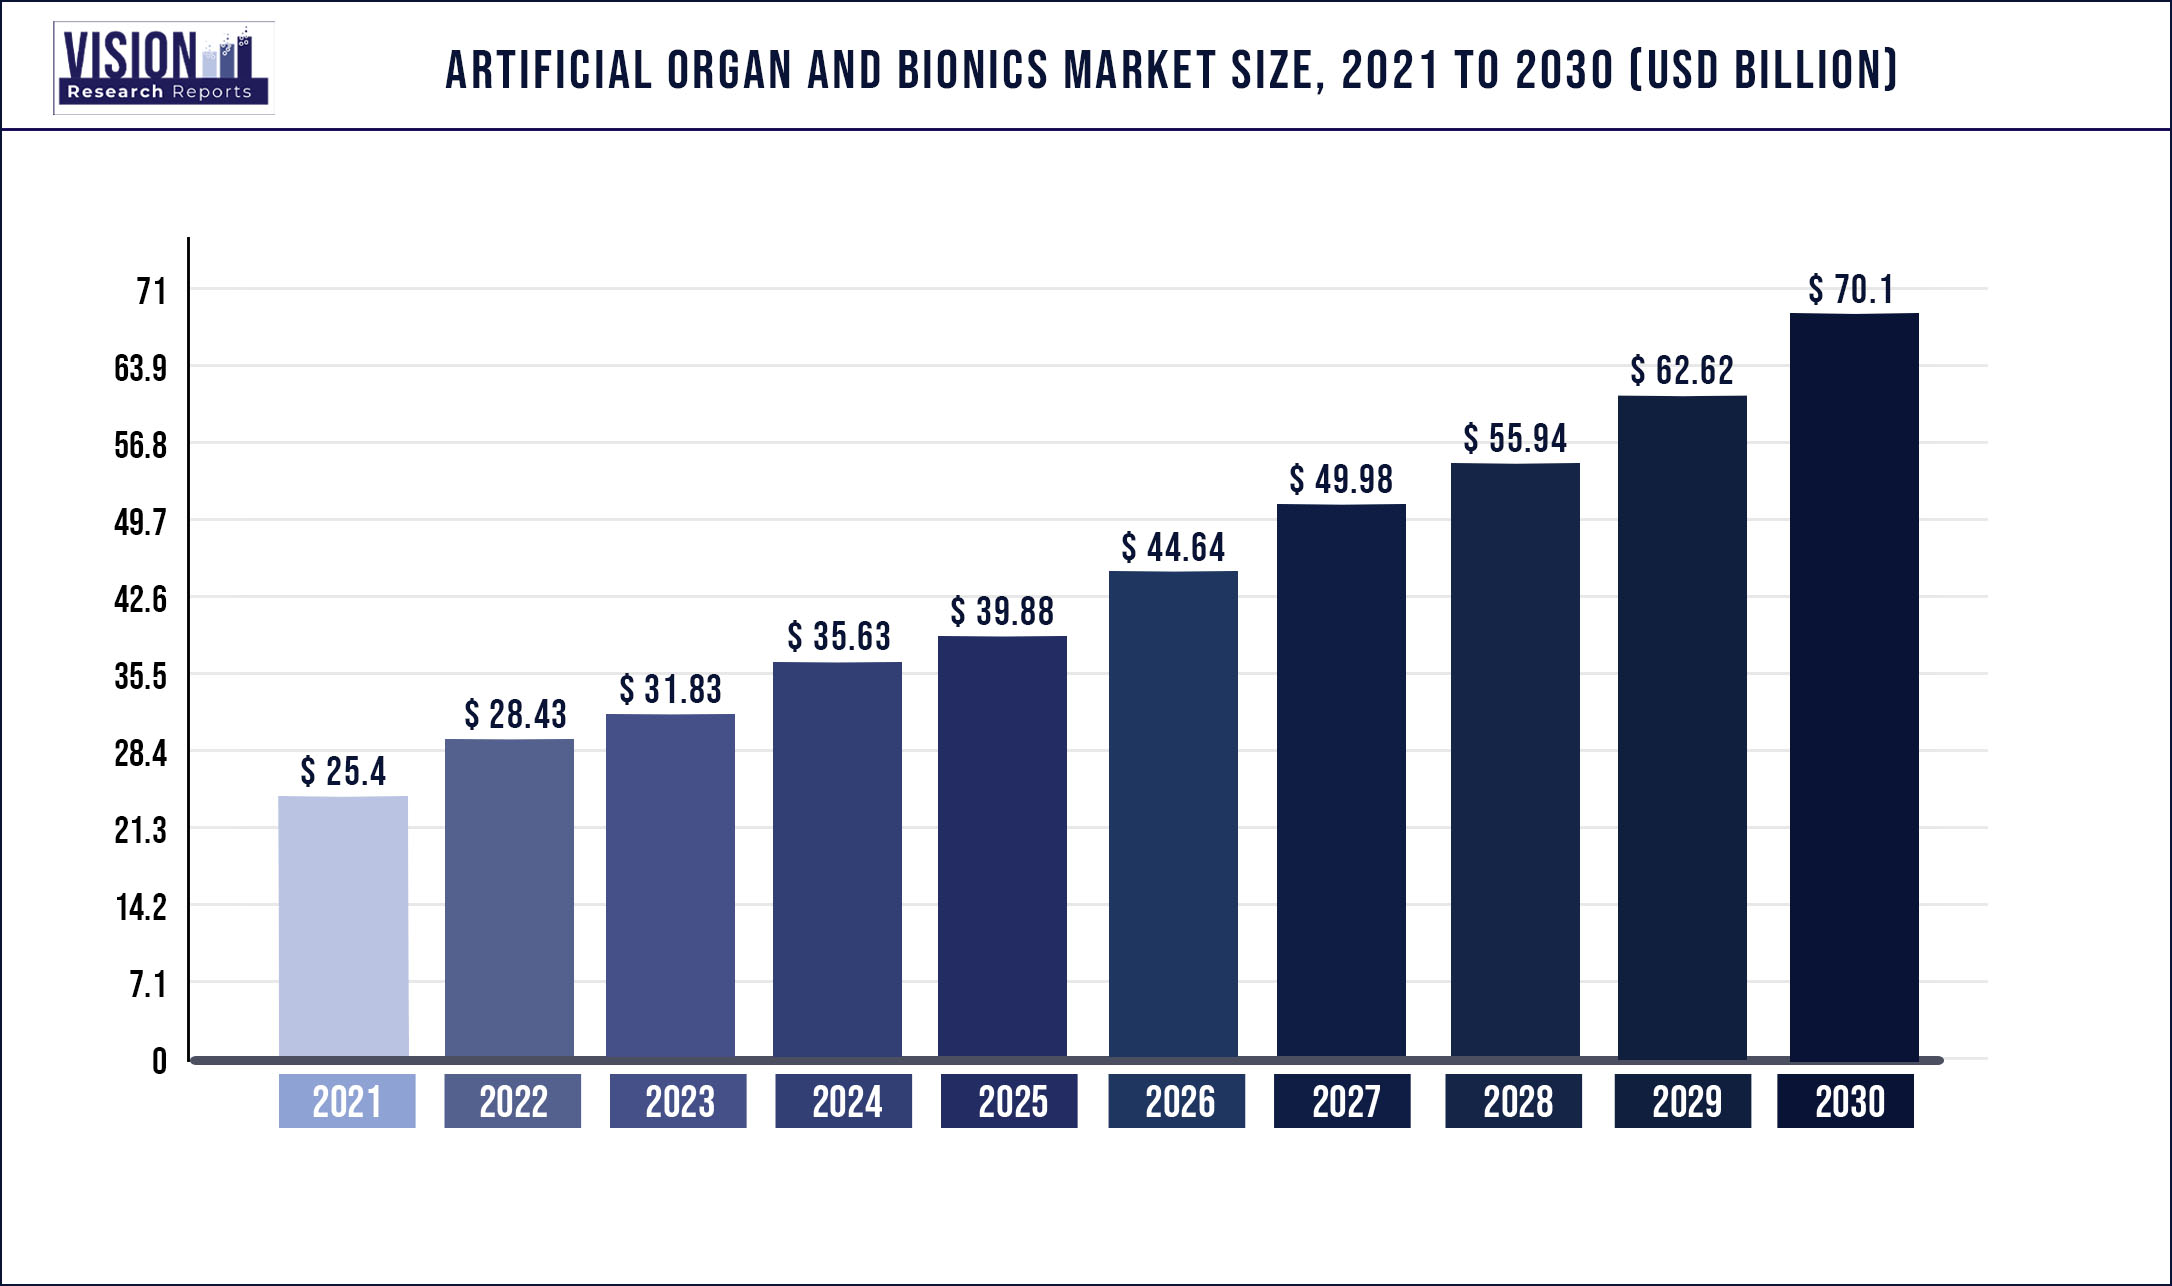 Artificial Organ And Bionics Market Size 2021 to 2030